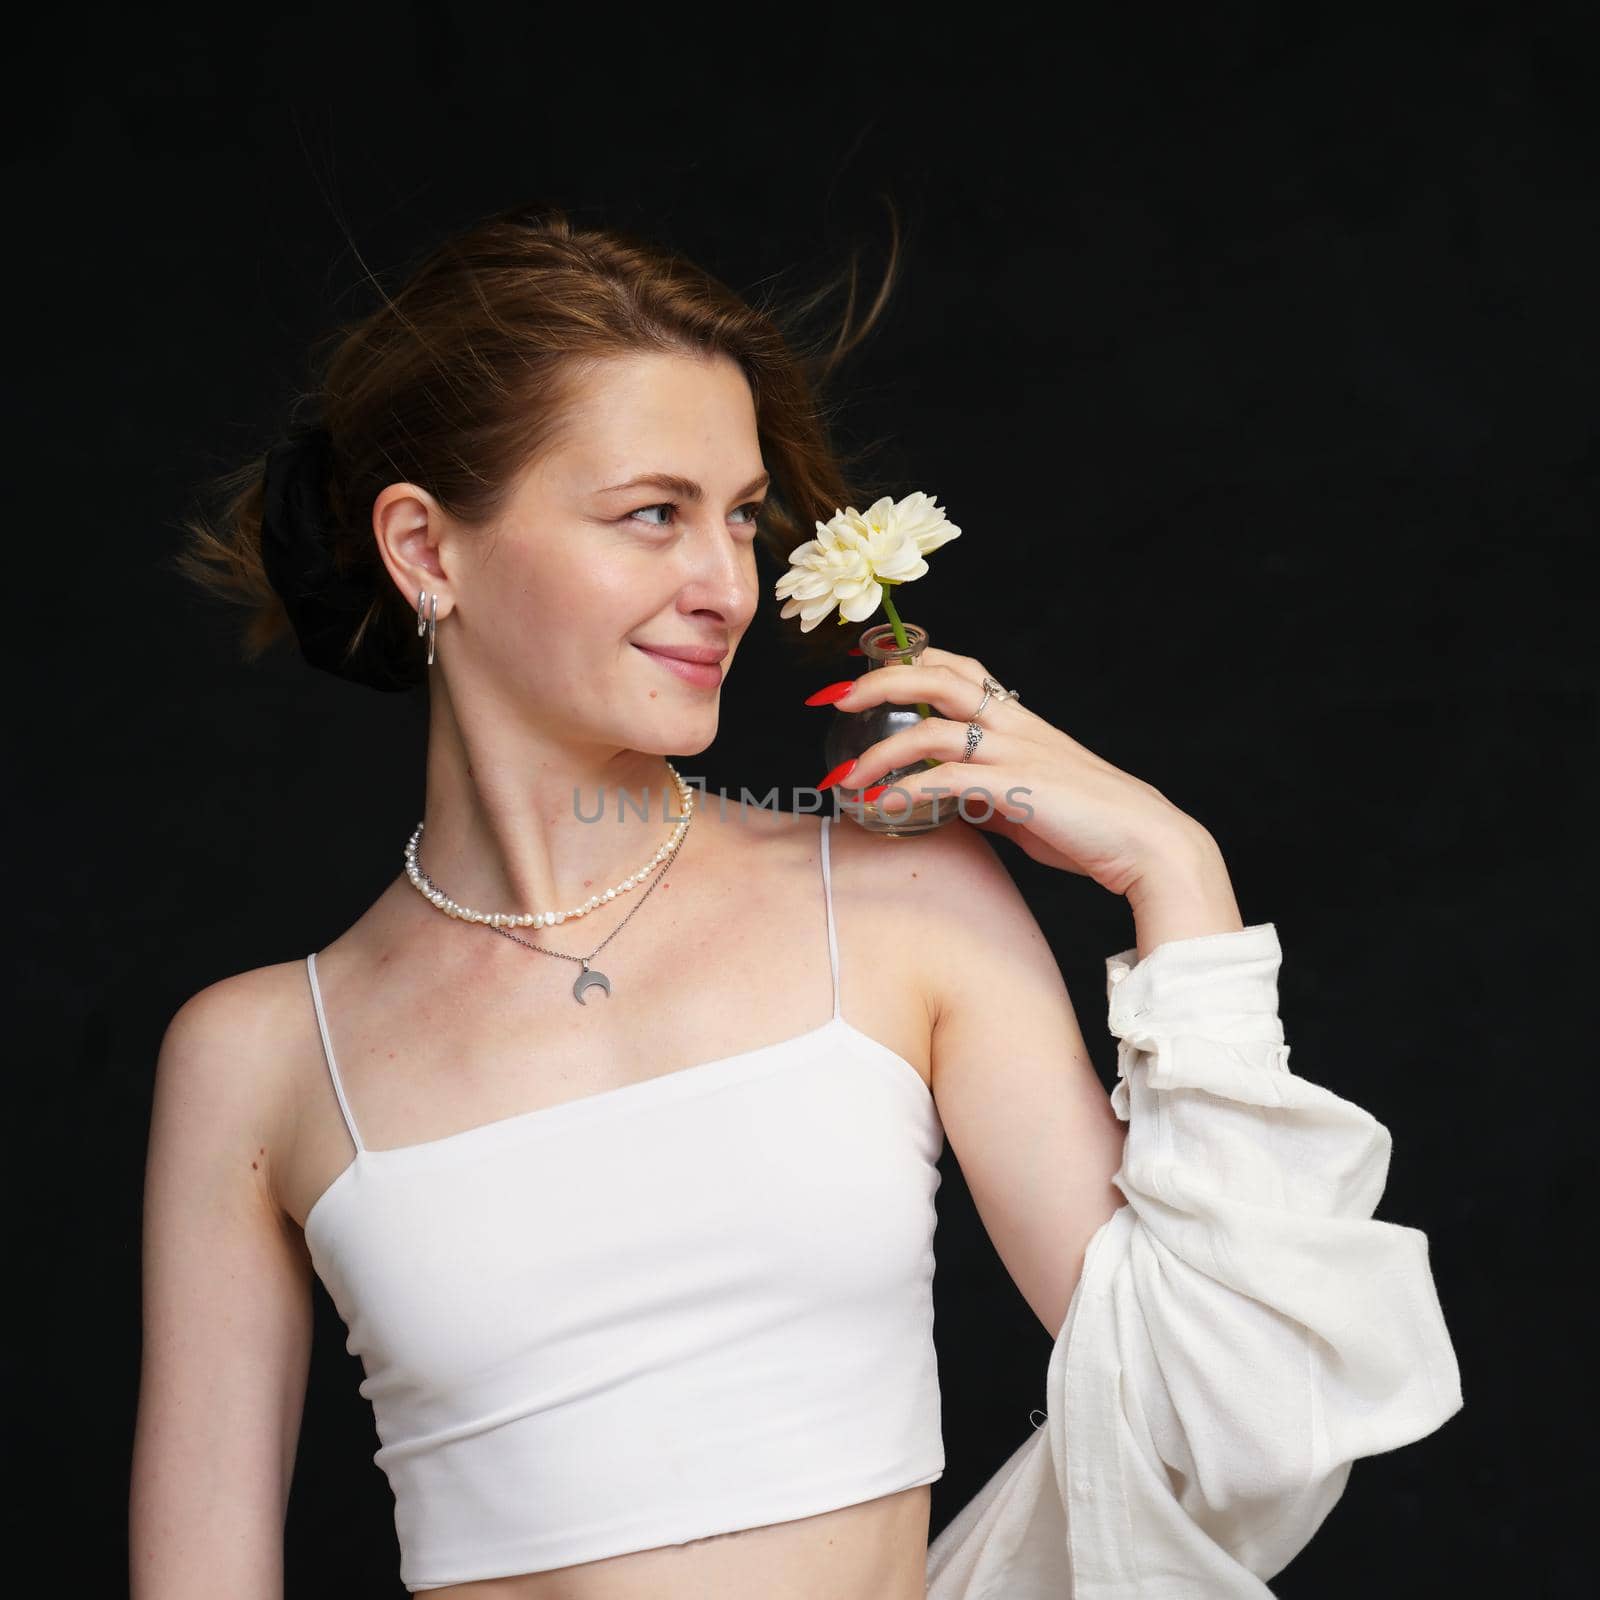 Slim smiling girl in light clothes posing with a flower in the studio on a black background by chichaevstudio